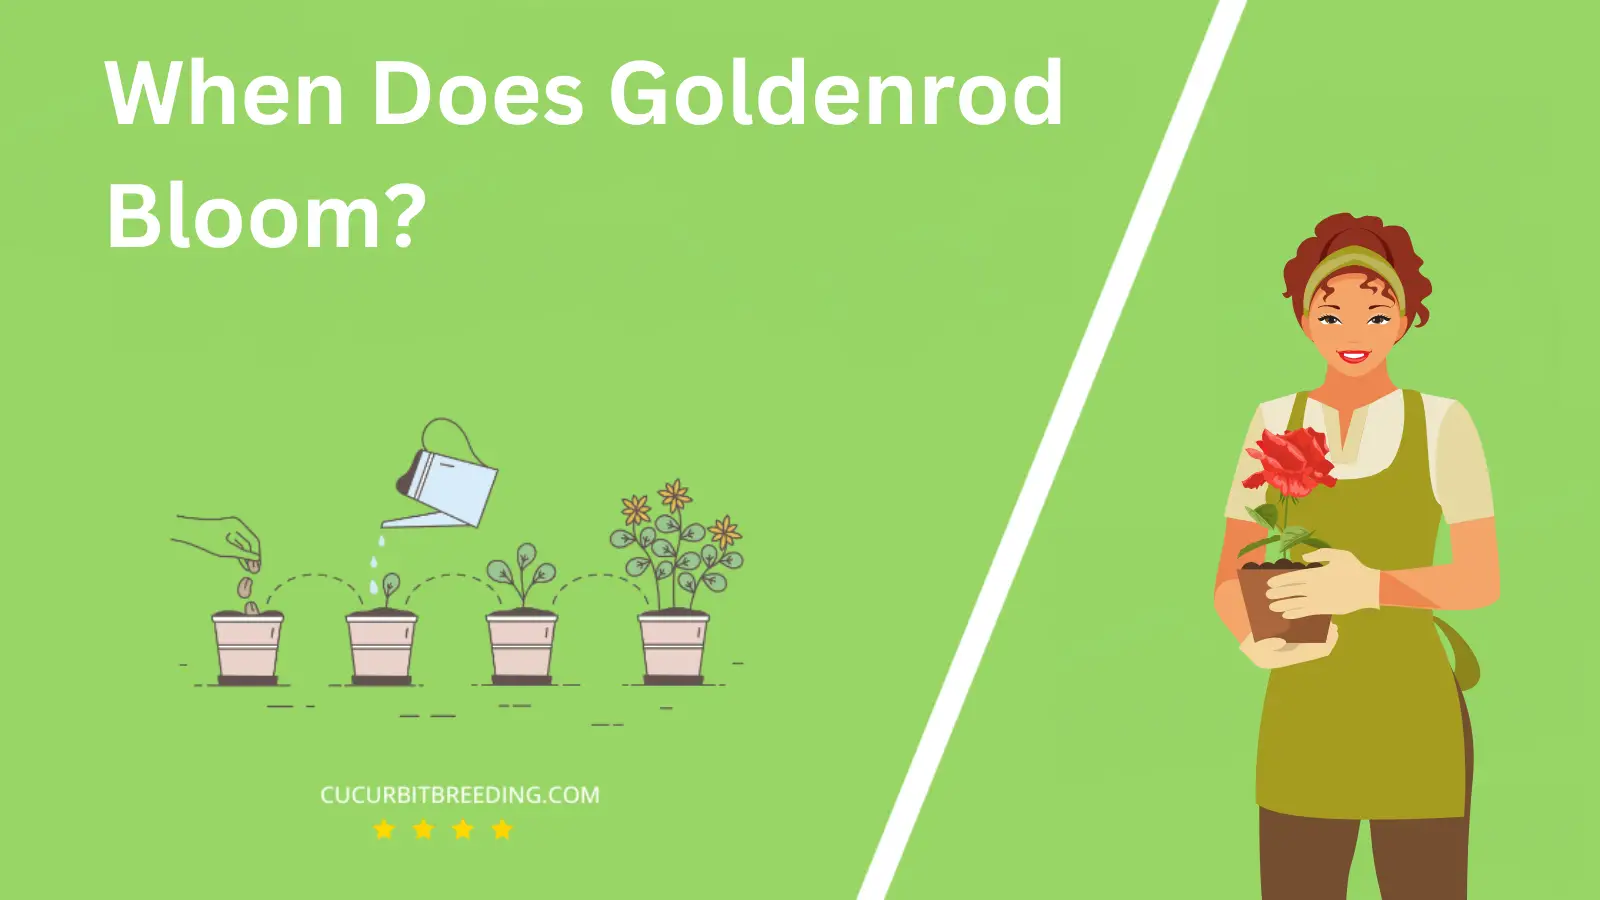 When Does Goldenrod Bloom?